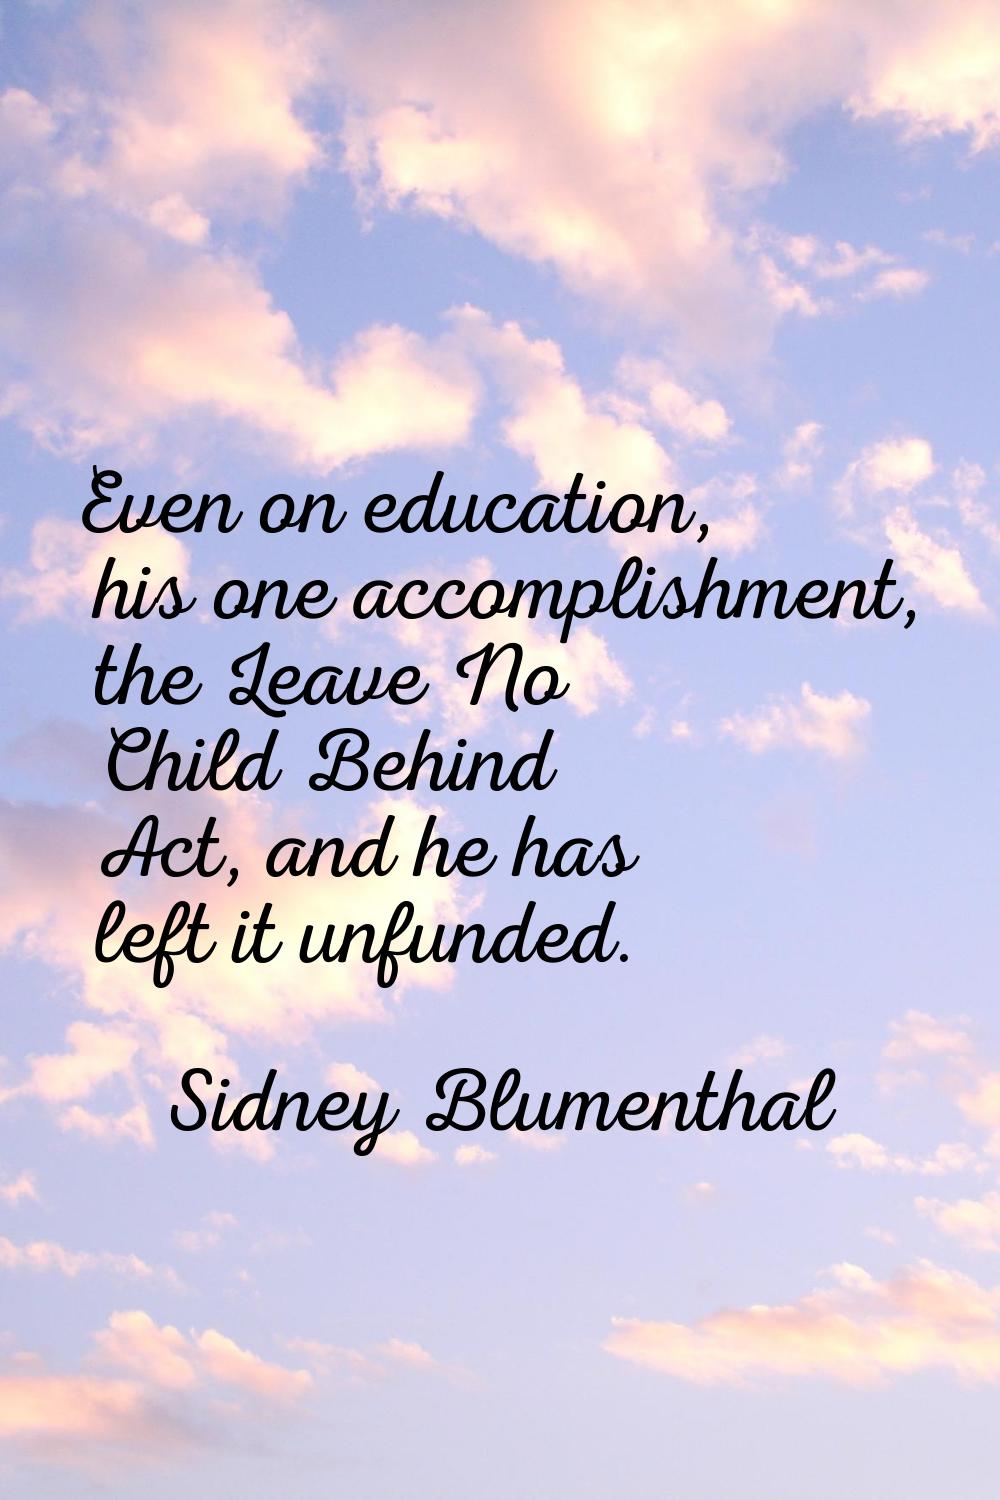 Even on education, his one accomplishment, the Leave No Child Behind Act, and he has left it unfund